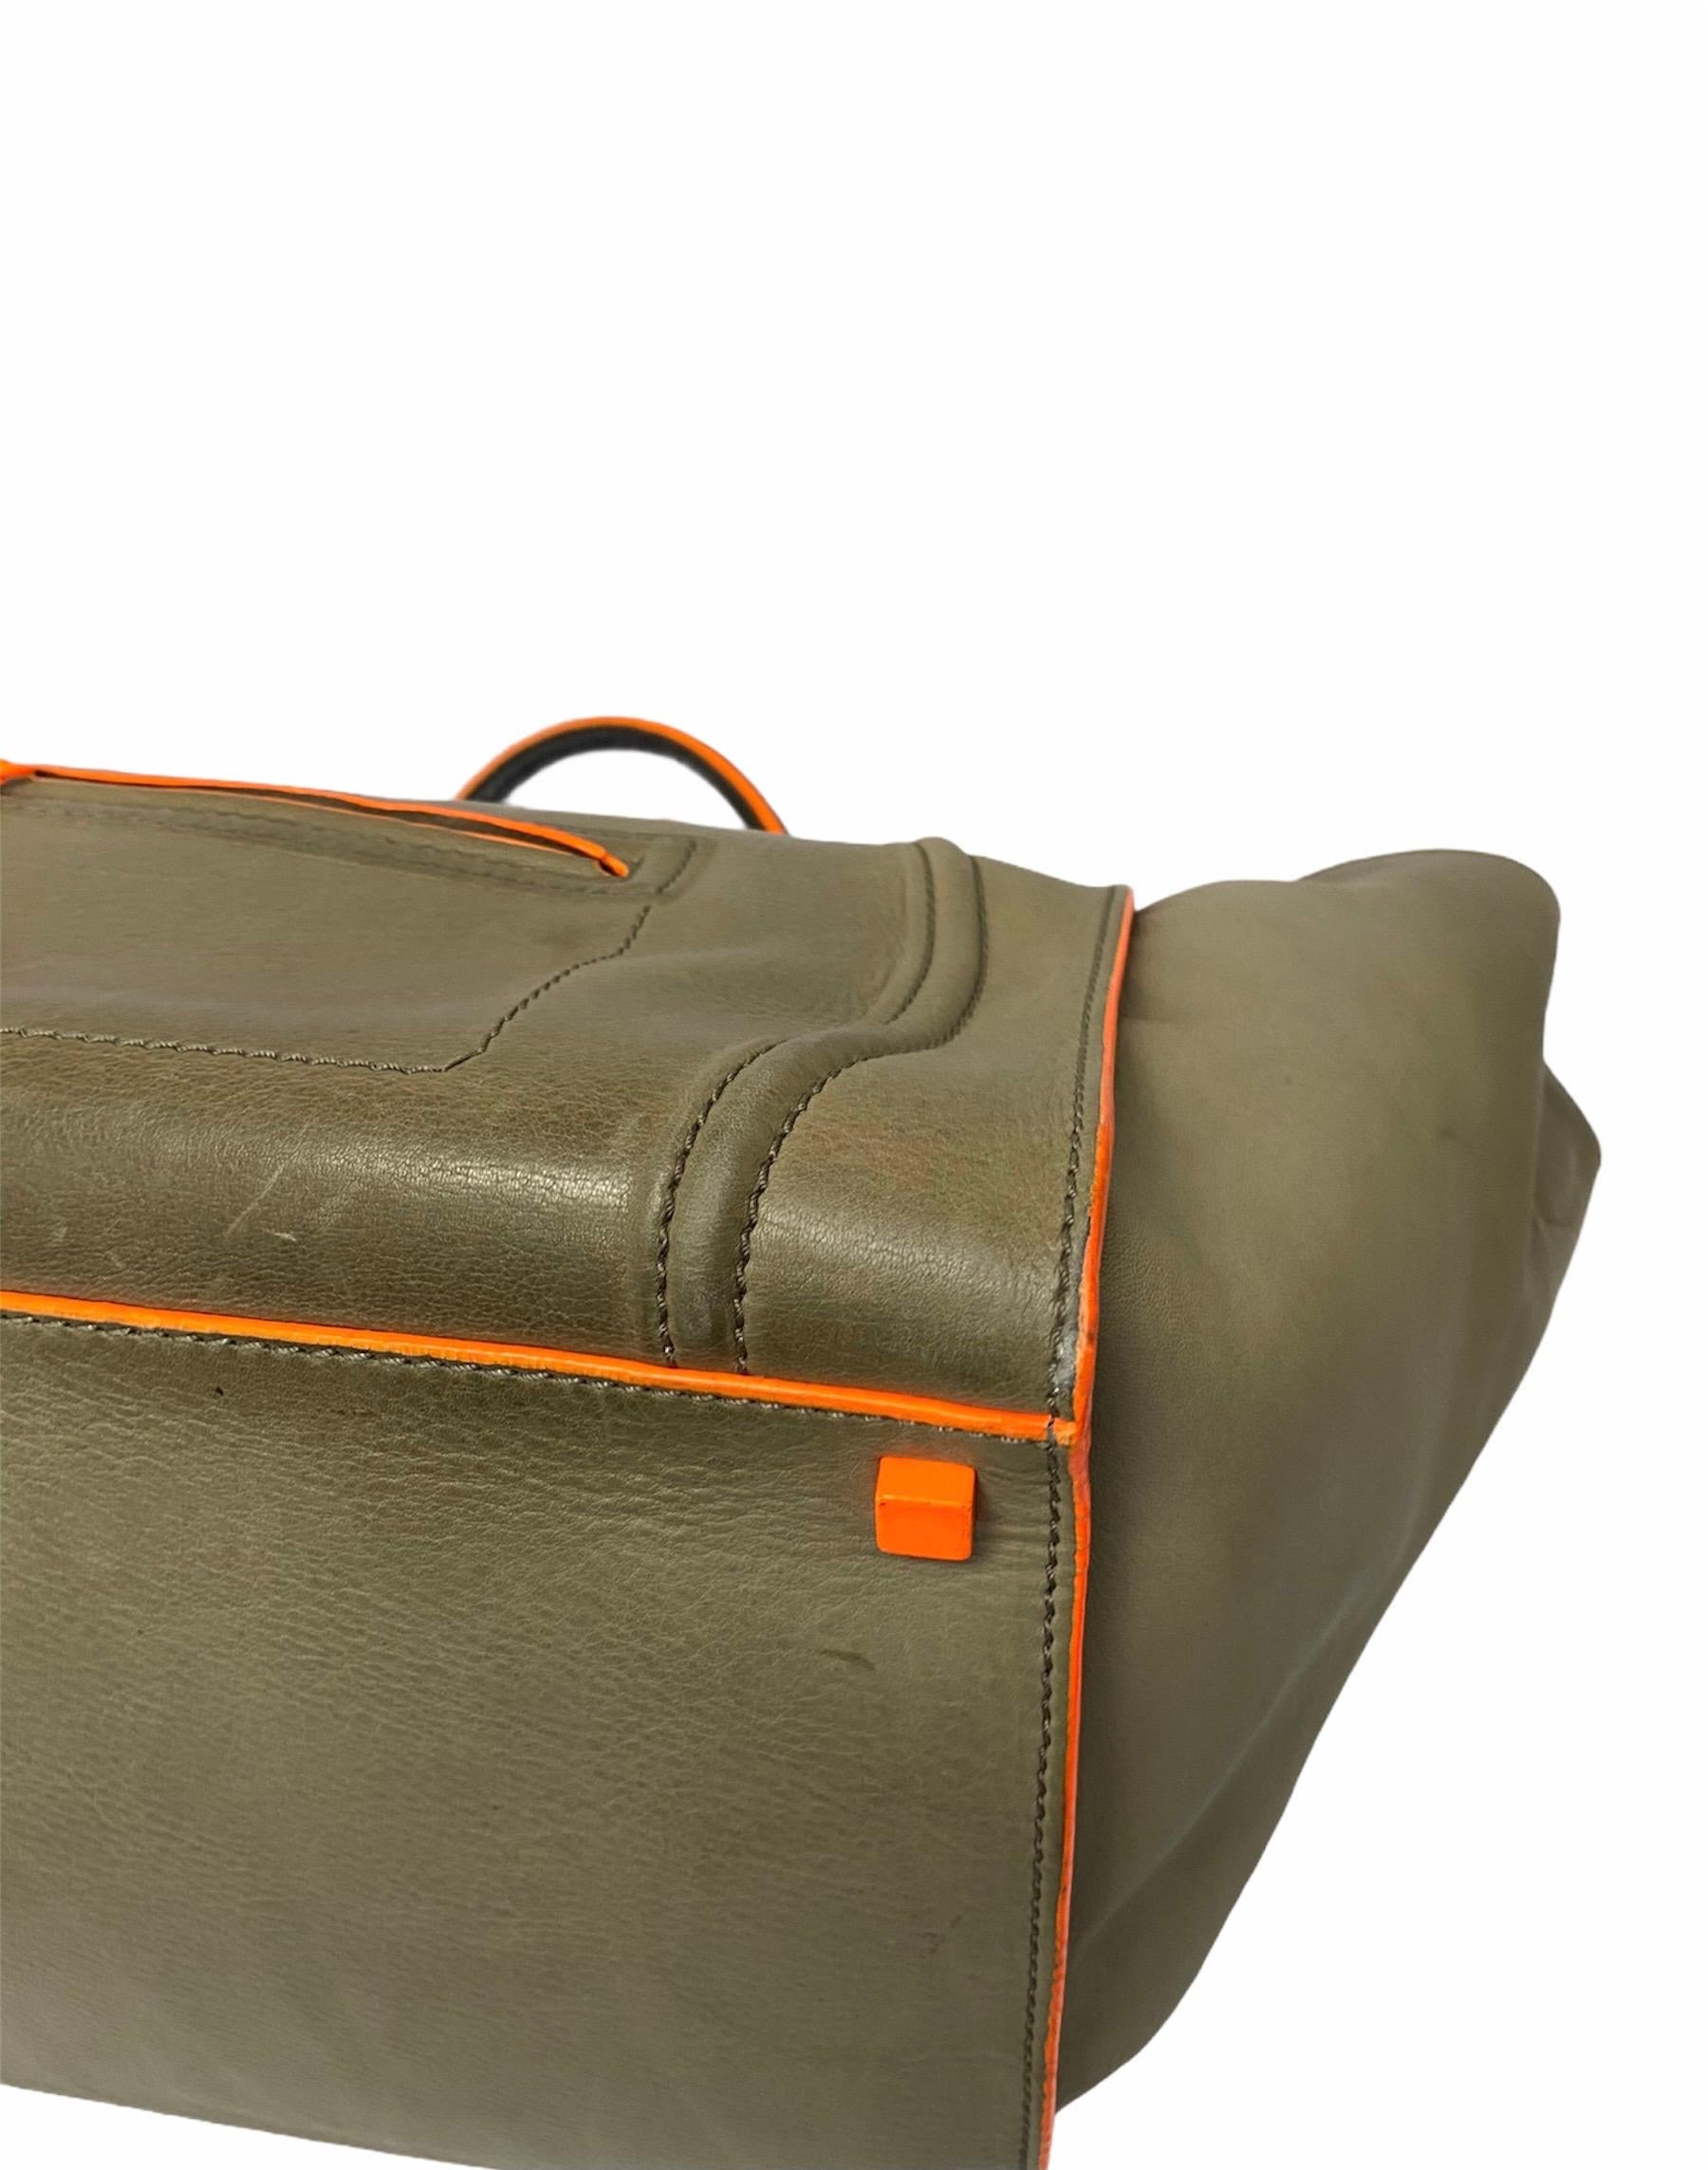 Cèline Luggage Phantom Bag in Gray Leather with Fluorescent Orange Inserts 1